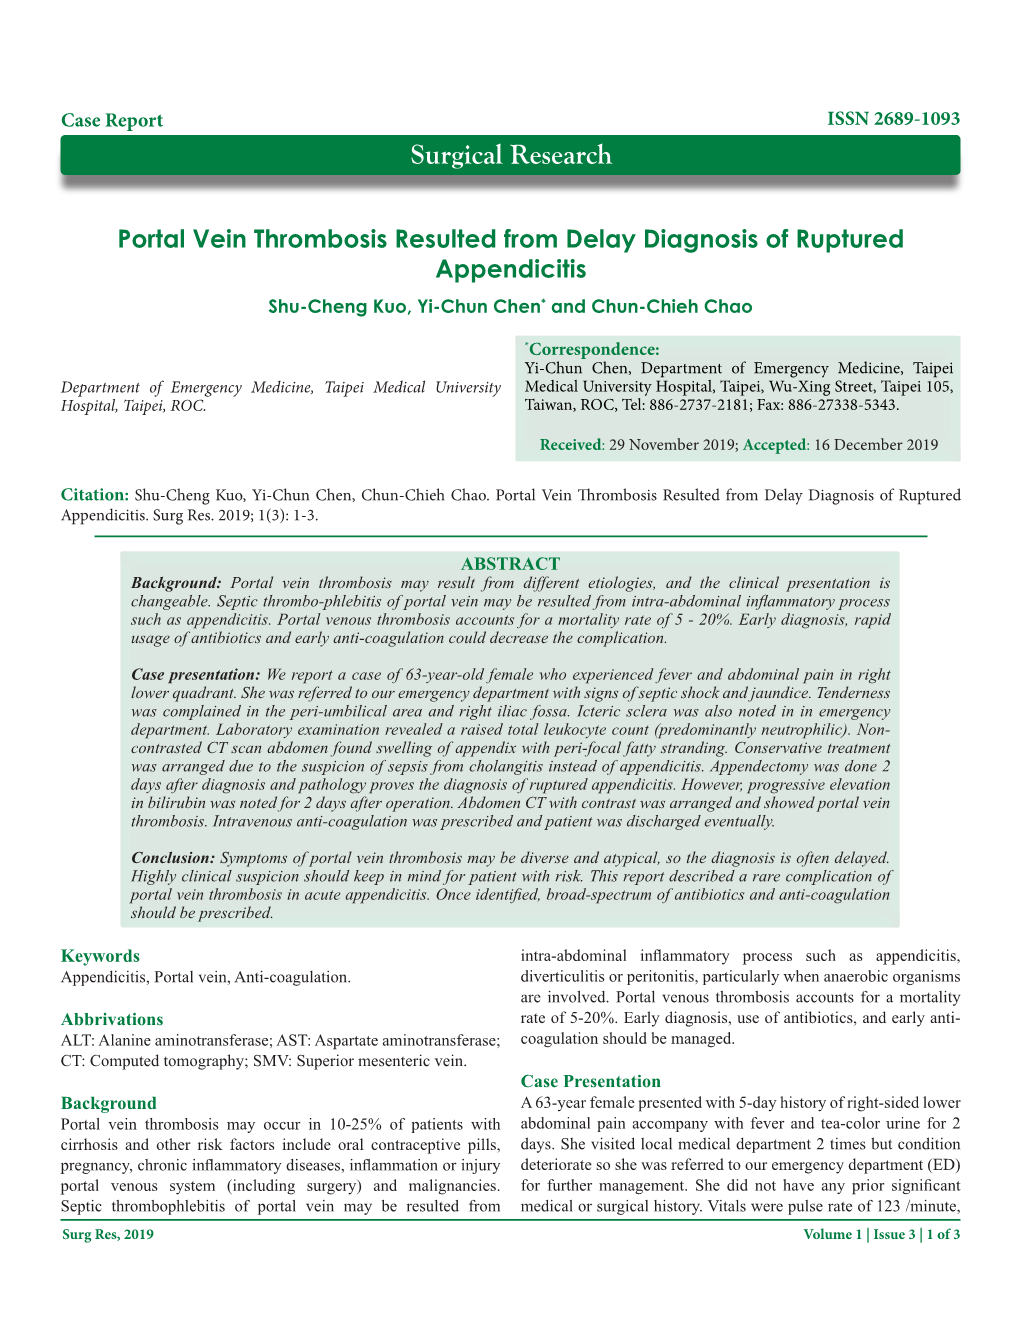 Portal Vein Thrombosis Resulted from Delay Diagnosis of Ruptured Appendicitis Shu-Cheng Kuo, Yi-Chun Chen* and Chun-Chieh Chao